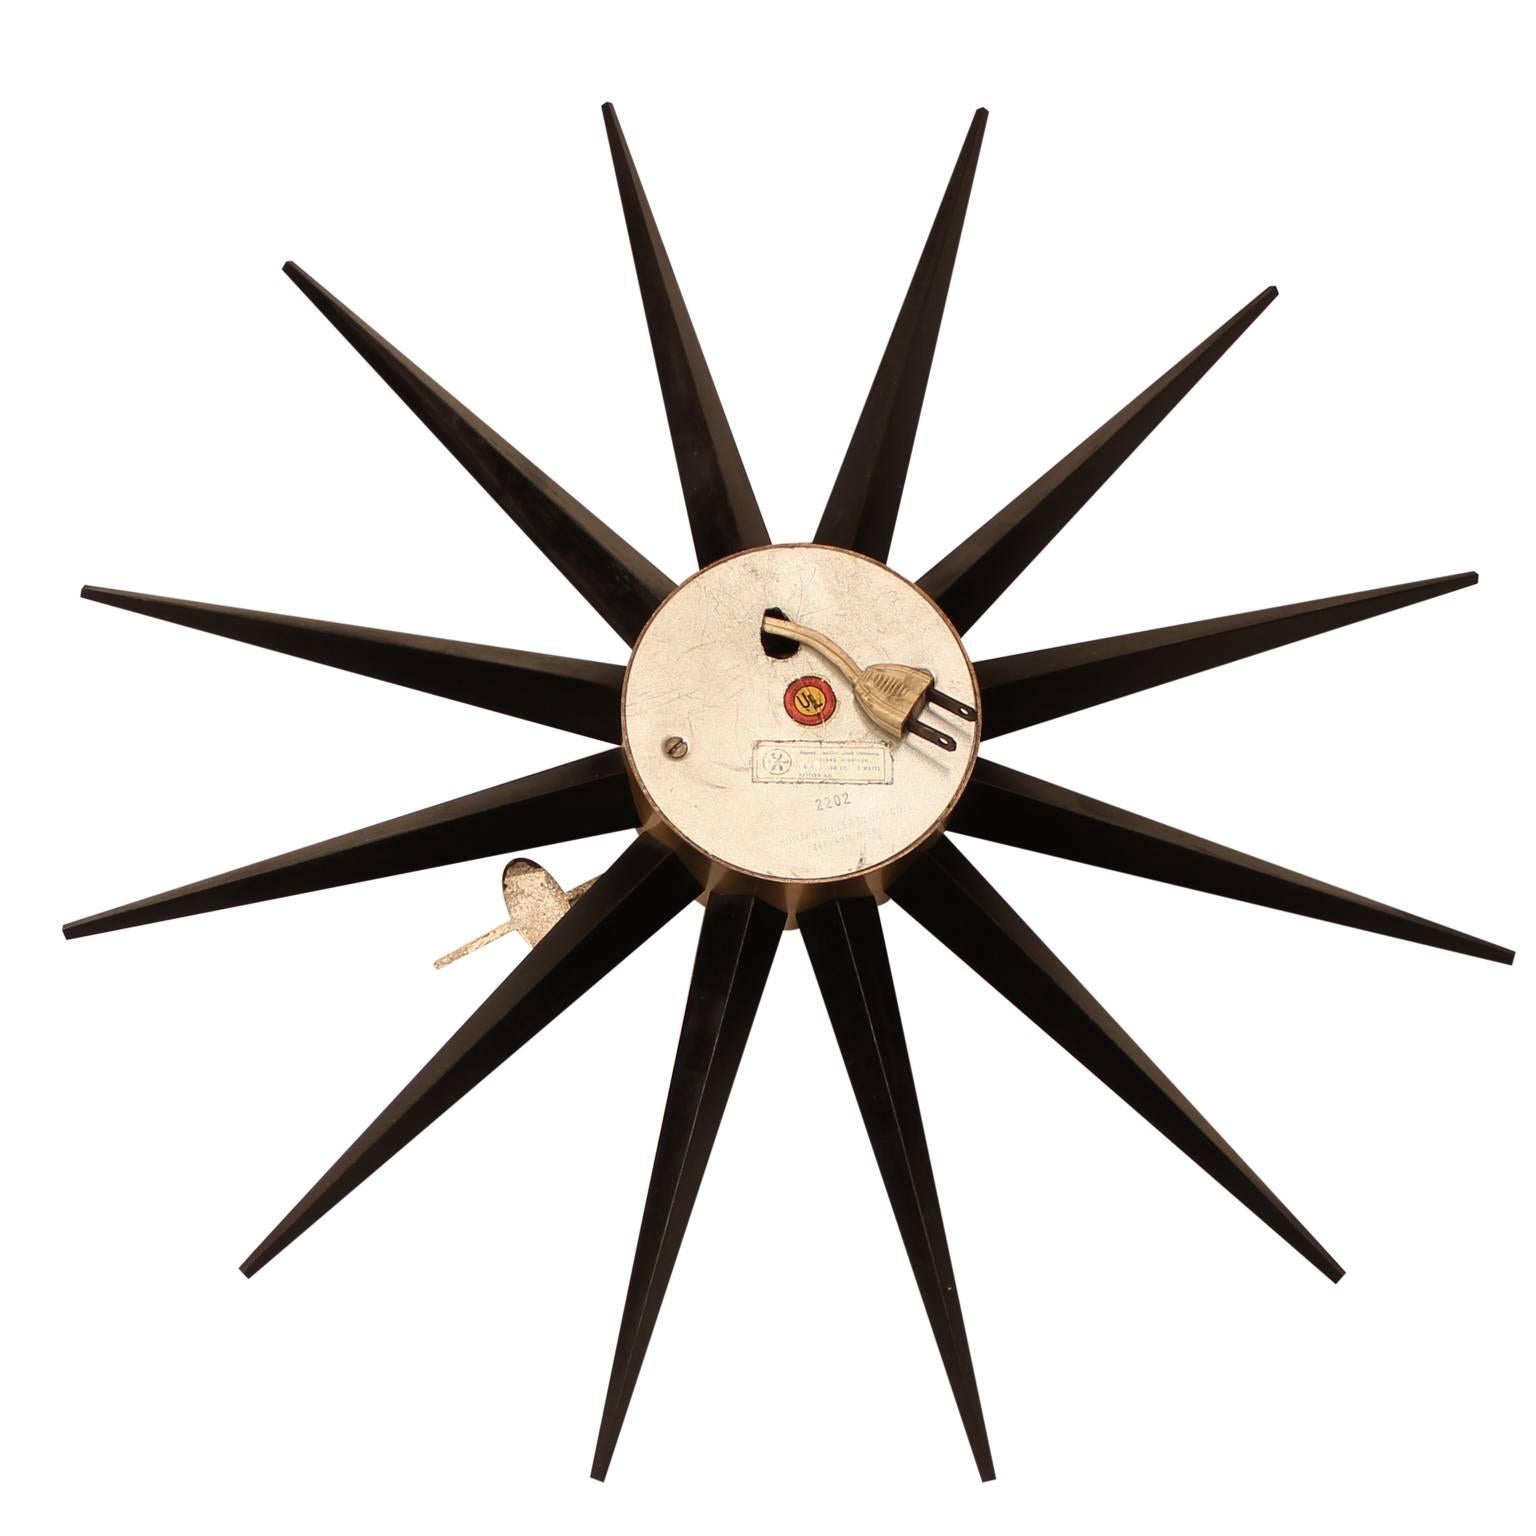 A George Nelson for Howard Miller Sunburst Clock, Model #2202. 

To avoid the appearance of cords, this piece was rewired to have the electrical plug extend from the back of the clock's base, which the most recent owner would plug into a